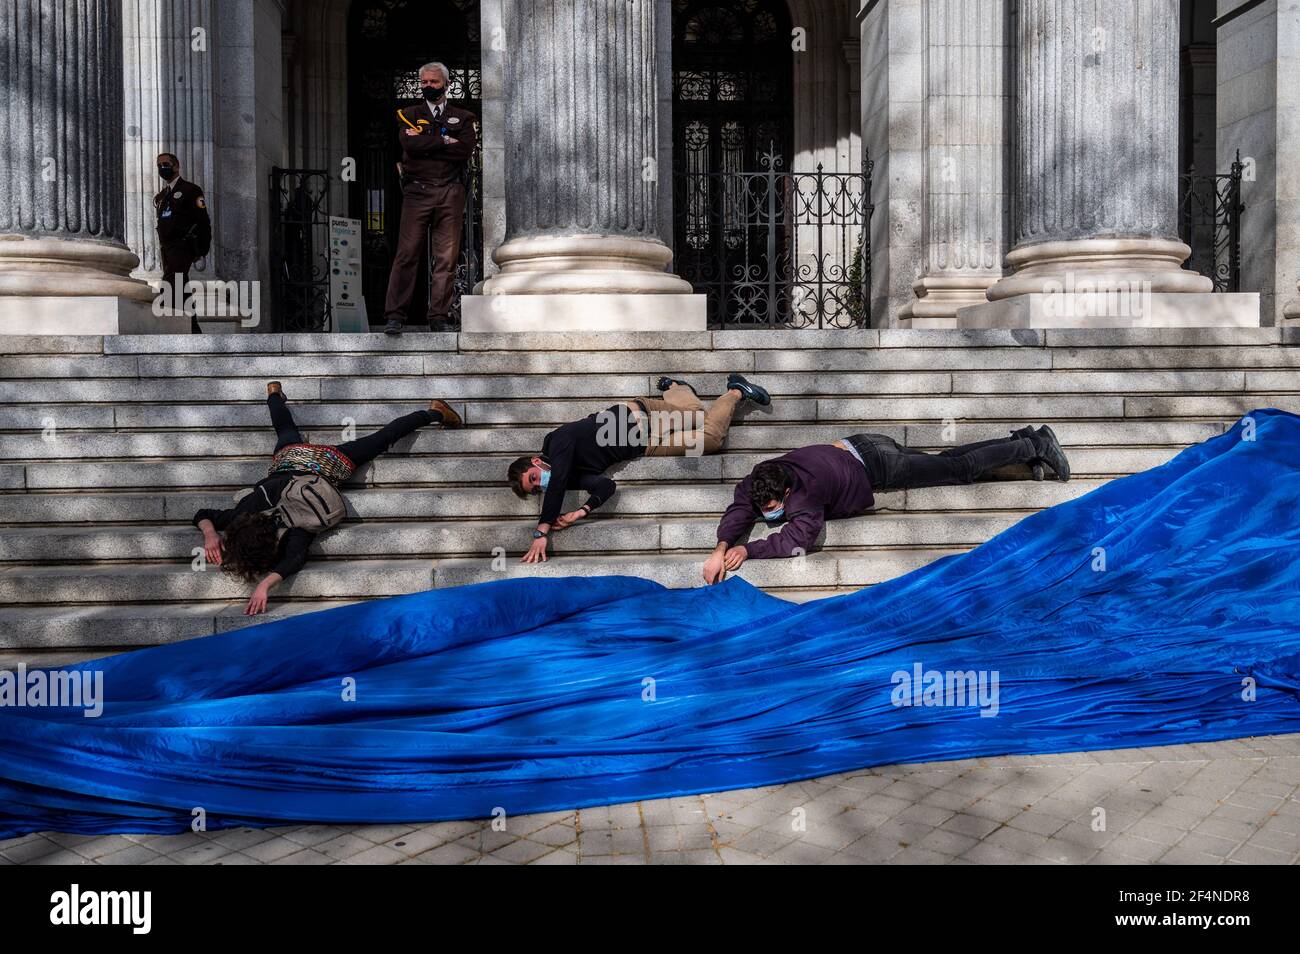 Madrid, Spain. 22nd Mar, 2021. Environmental activists of 'Extinction Rebellion' (XR) and 'Friends of the Earth' groups performing an action in front of the Madrid Stock Exchange building, coinciding with the World Water Day, denouncing the danger of speculation with a basic good such as water. Activists are warning about the precedent for California's water price on the Wall Street Futures Market since last December. Credit: Marcos del Mazo/Alamy Live News Stock Photo